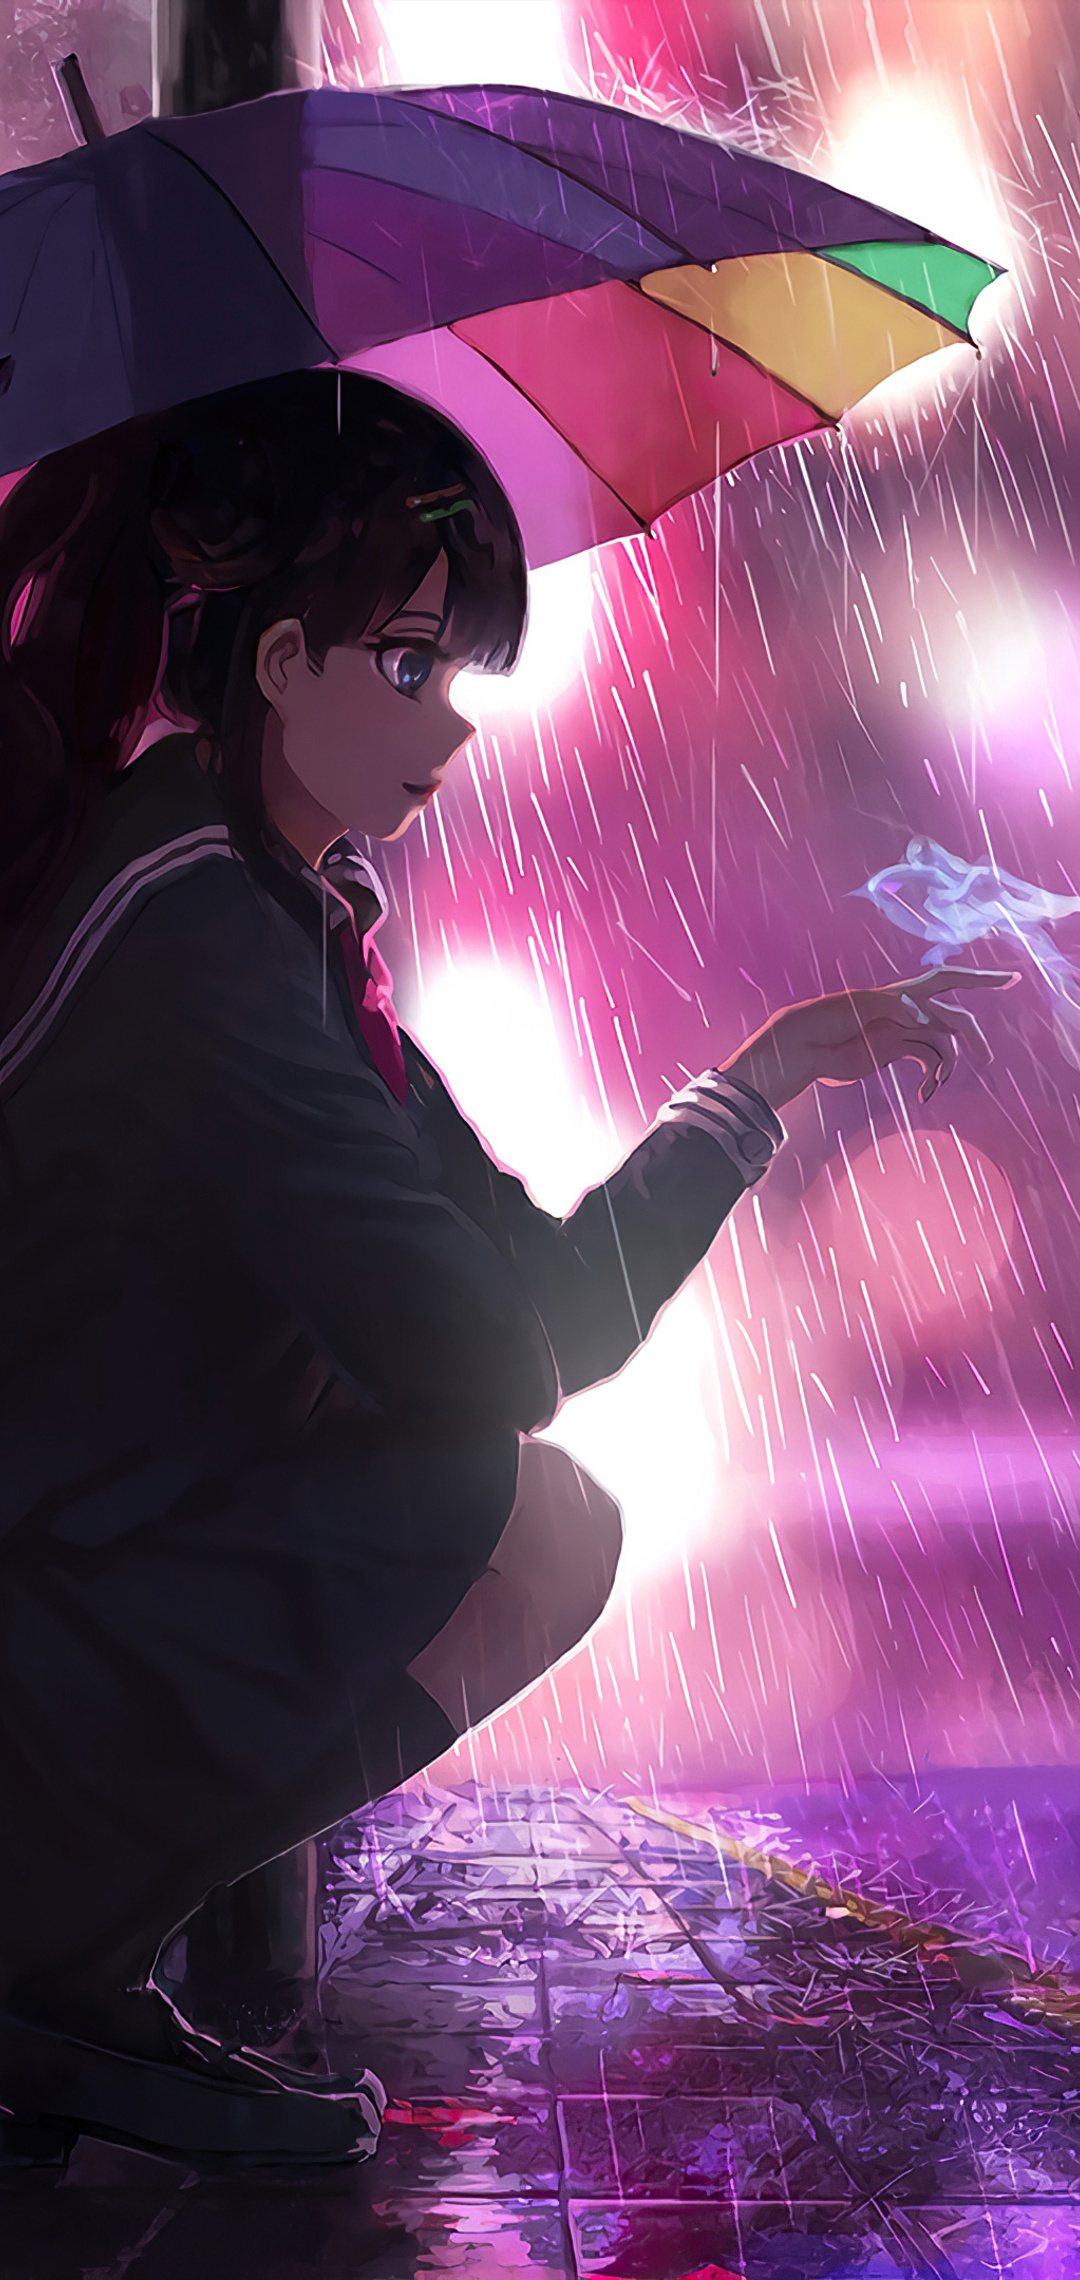 1080x2280 Umbrella Rain Anime Girl 4k One Plus 6,Huawei p20,Honor view  10,Vivo y85,Oppo f7,Xiaomi Mi A2 HD 4k Wallpapers, Images, Backgrounds,  Photos and Pictures